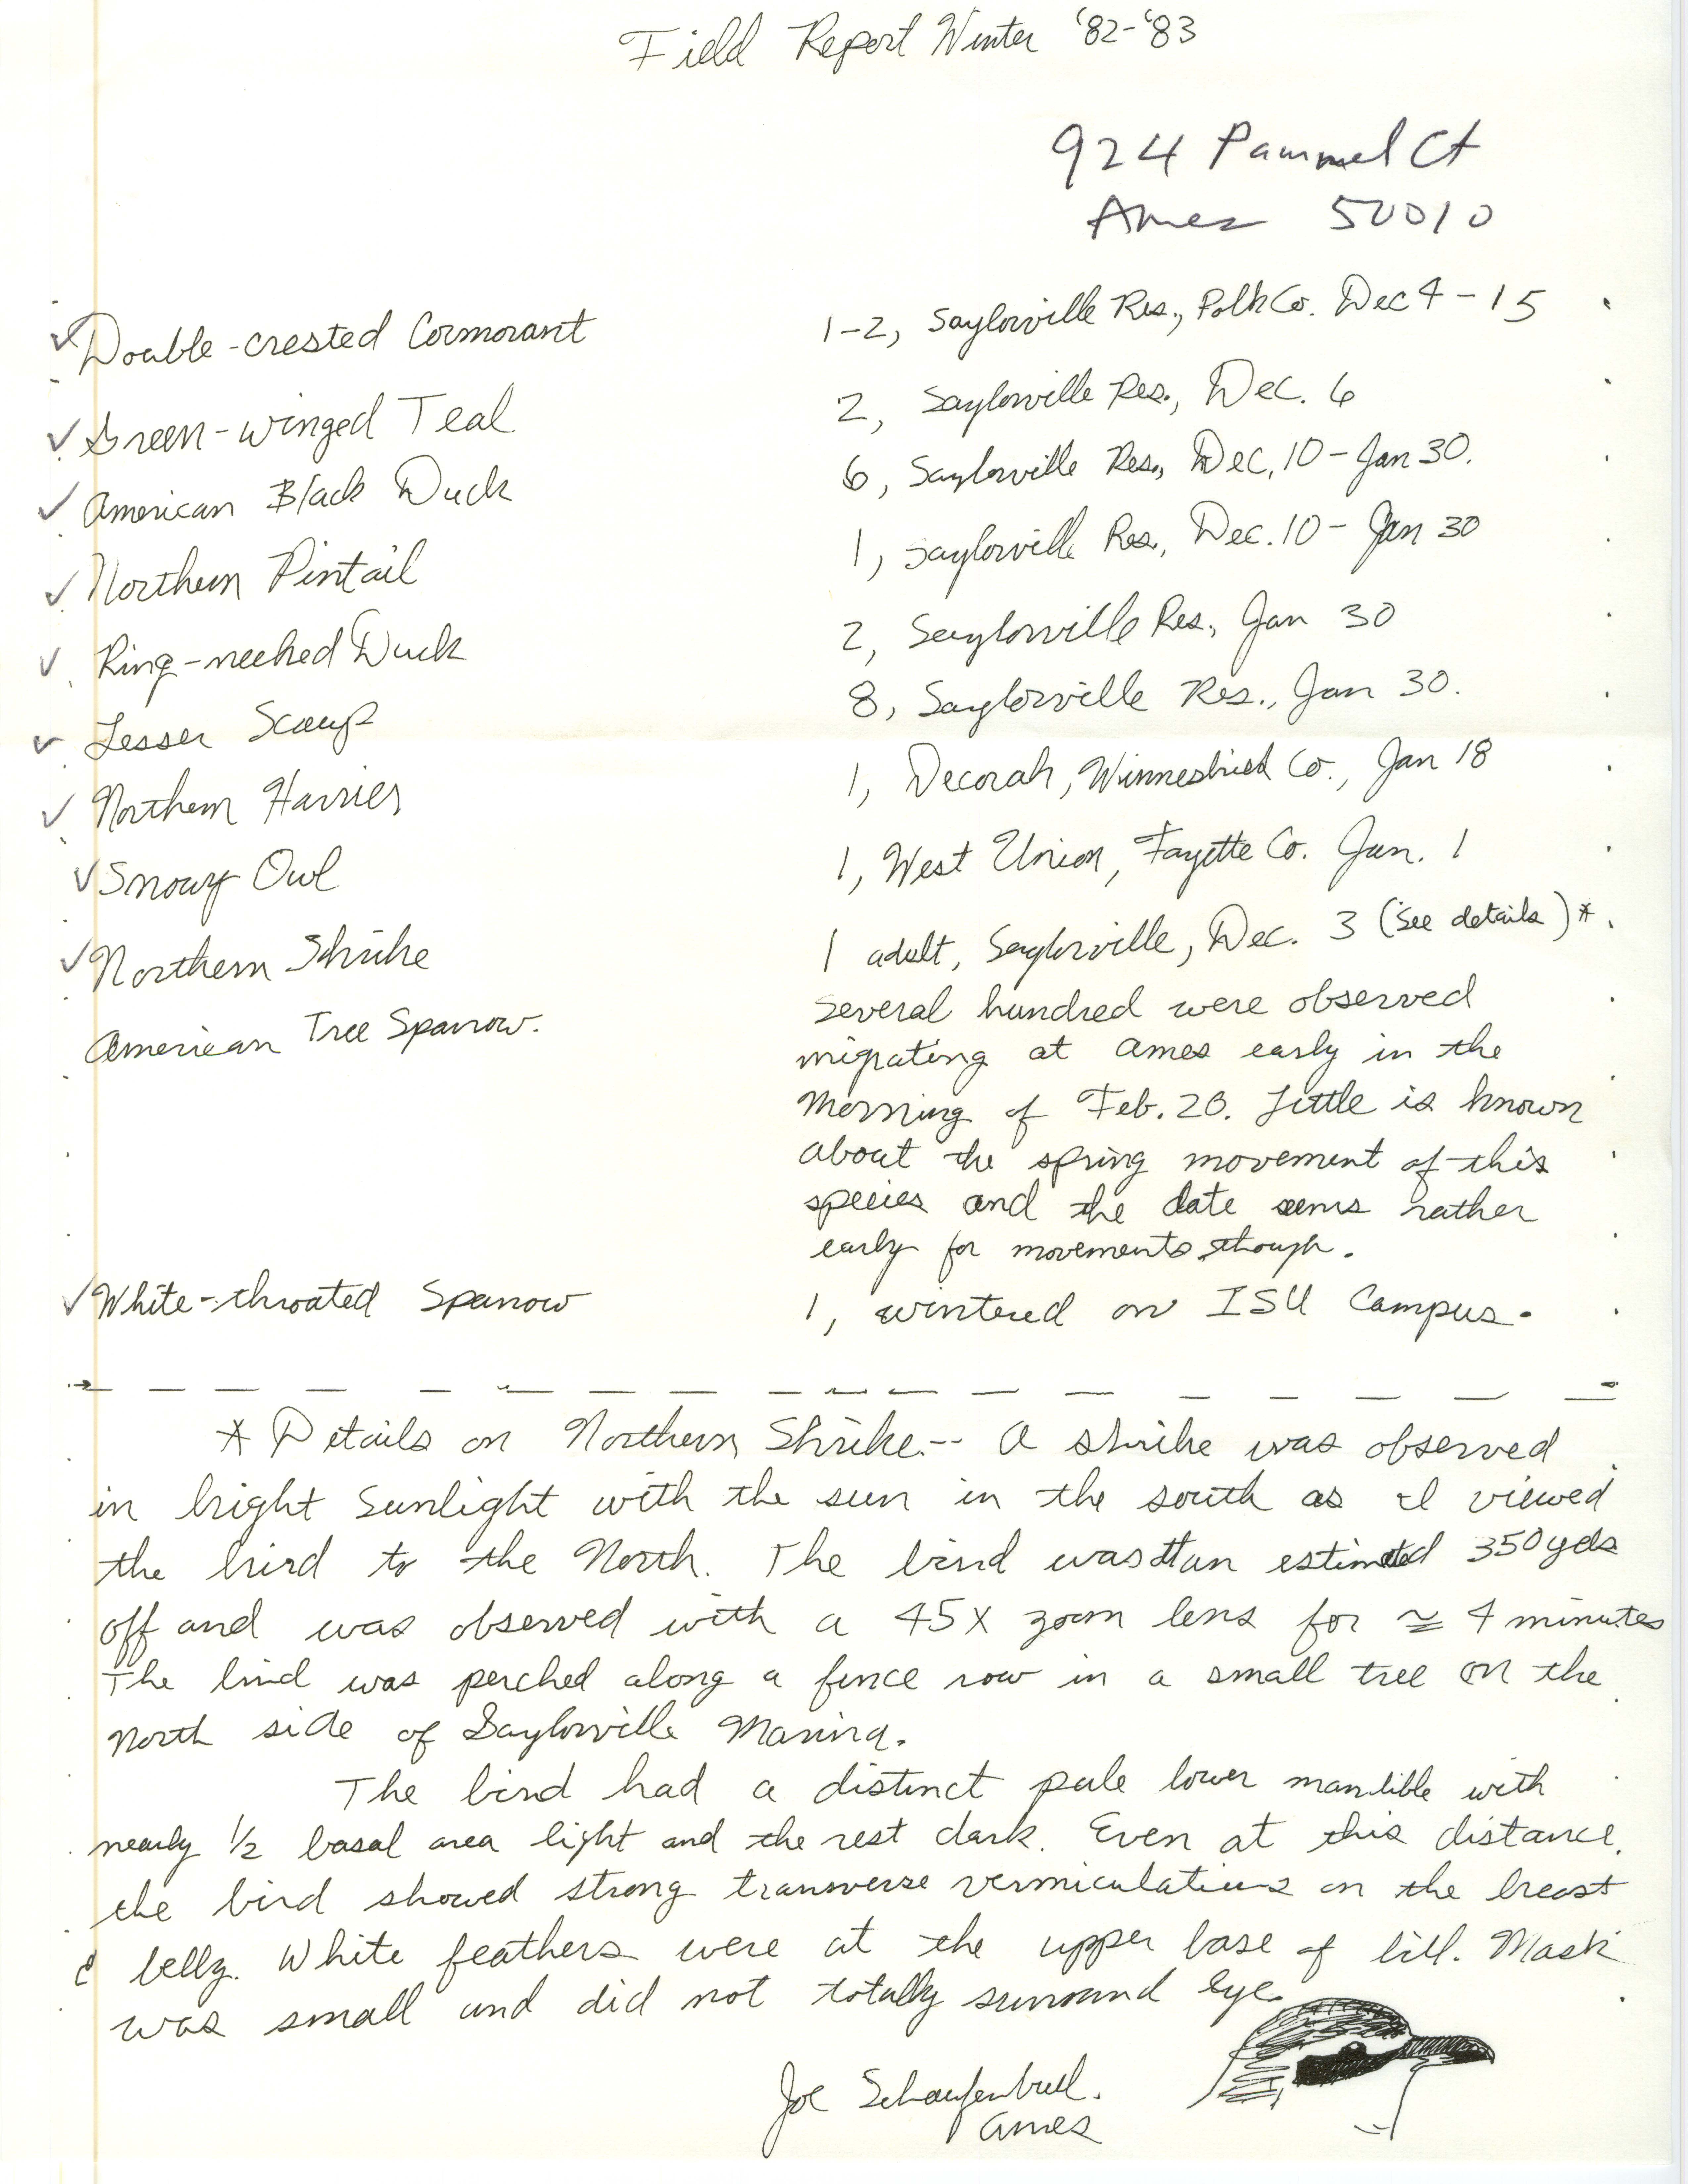 Field notes contributed by Joseph P. Schaufenbuel, winter 1982-1983